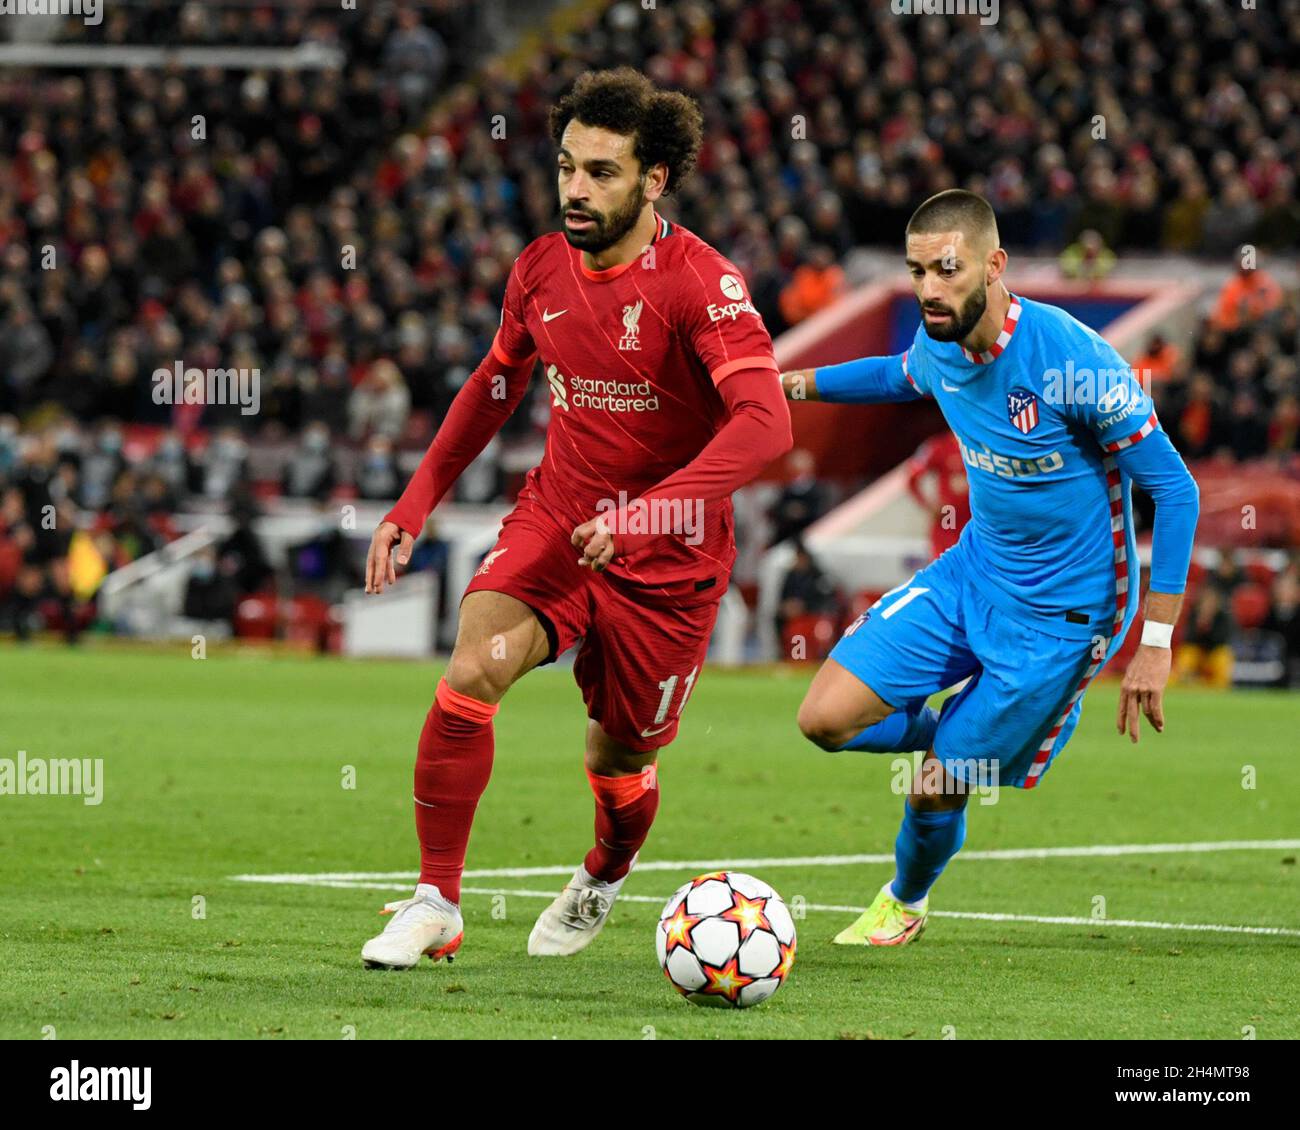 Mohamed Salah #11 of Liverpool shields the ball Yannick Carrasco #21 of Atletico Madrid Stock Photo